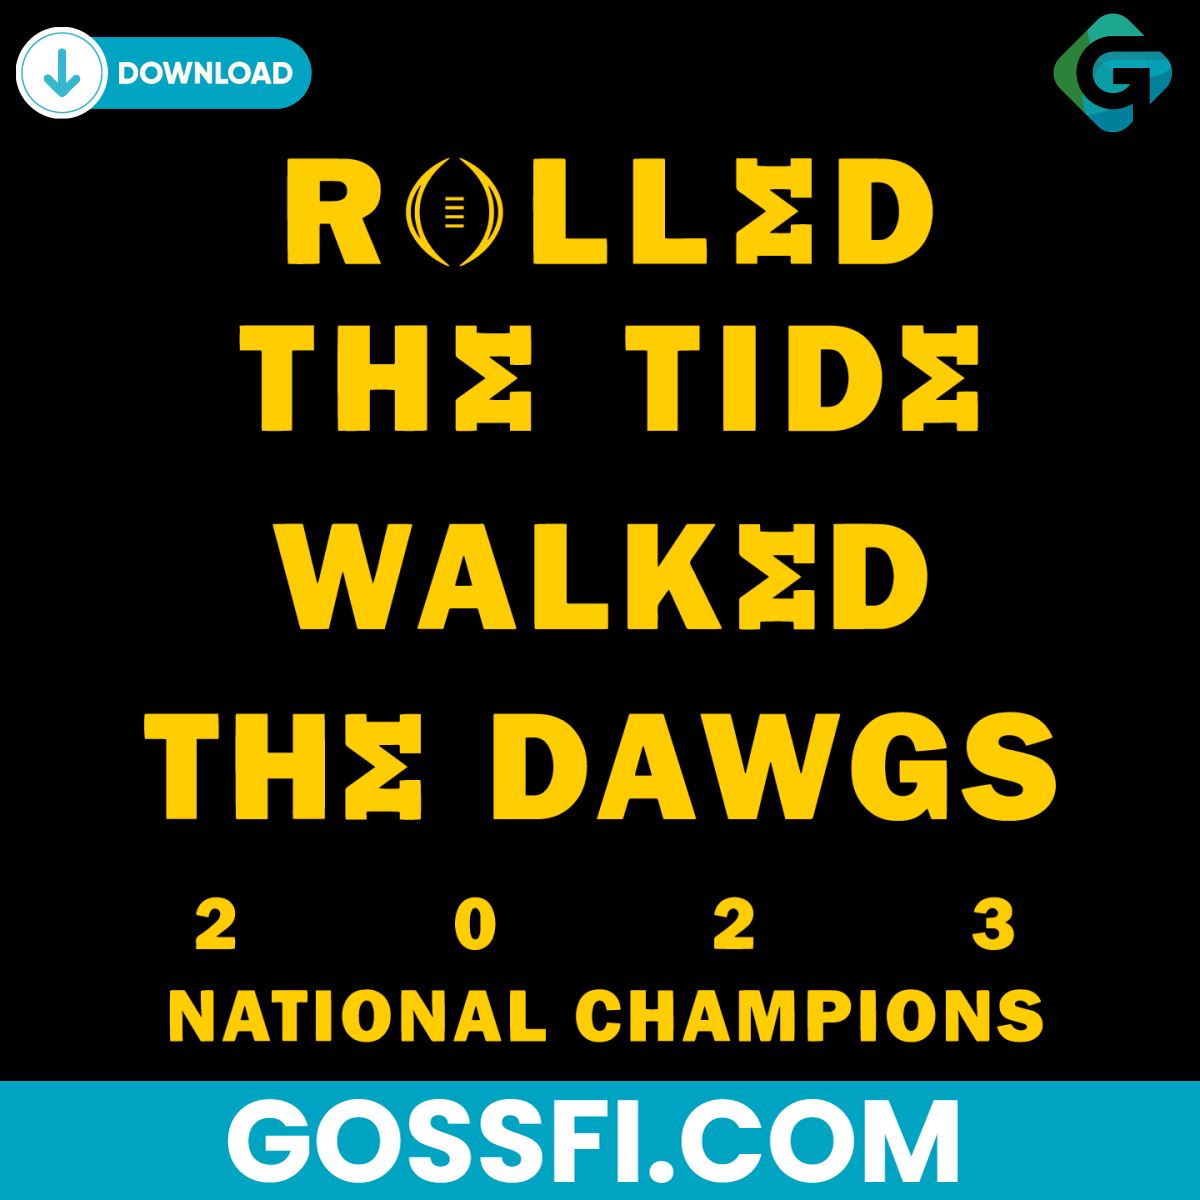 rolled-the-tide-walked-the-dawgs-2023-national-champions-svg